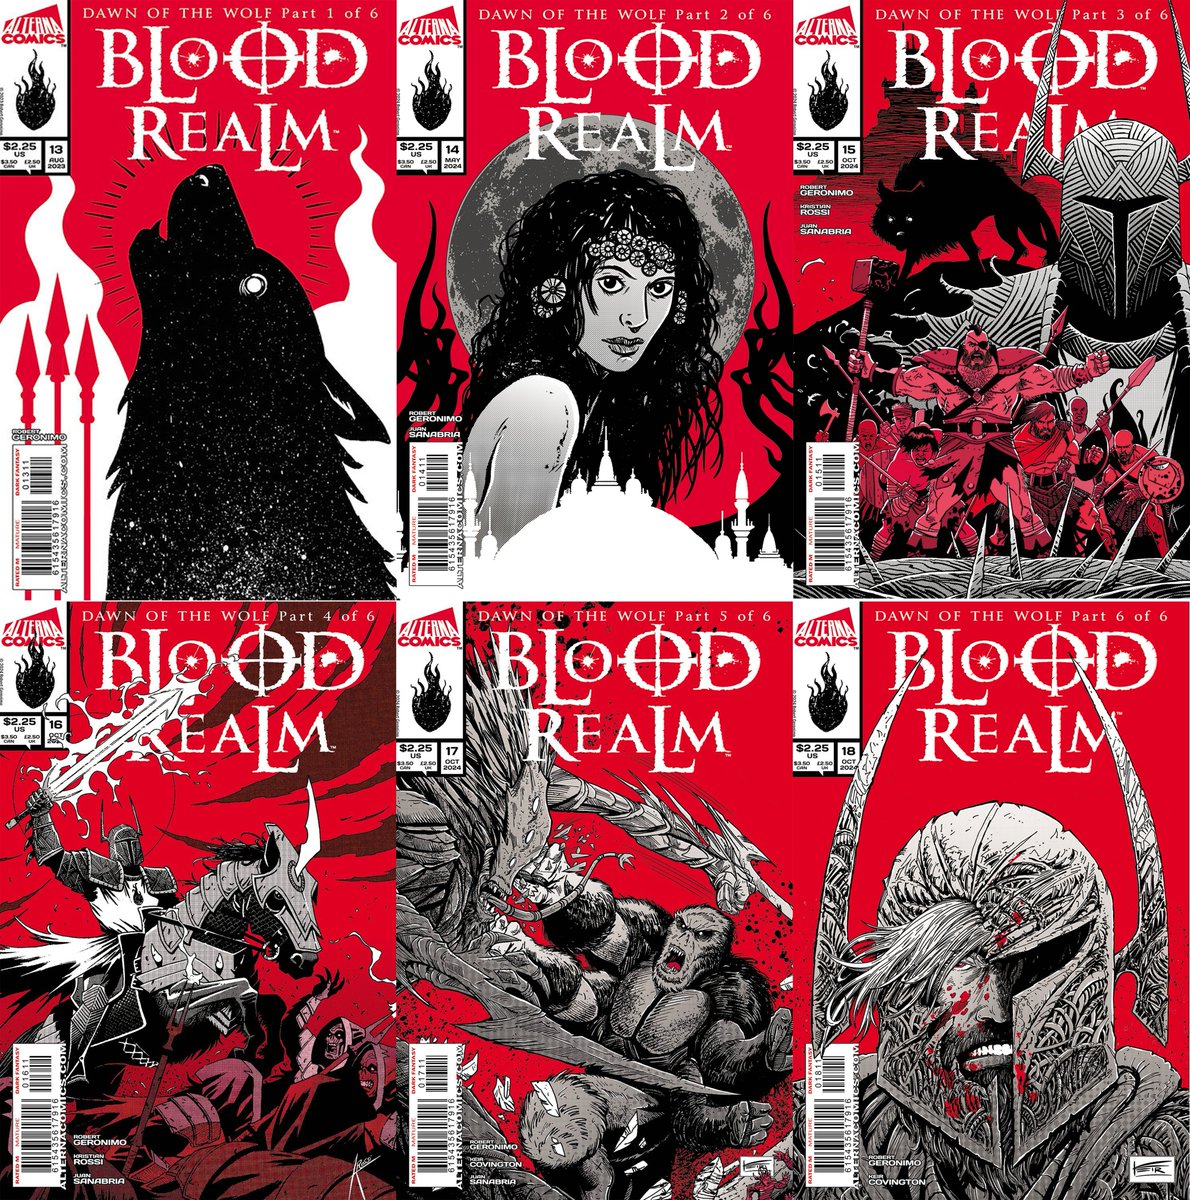 The BLOOD REALM Indiegogo campaign launches TOMORROW! Here's a look at all of the covers together. indiegogo.com/projects/blood… Today is the LAST DAY to sign up for the Prelaunch! All sign-ups receive a trading card after they back the campaign.